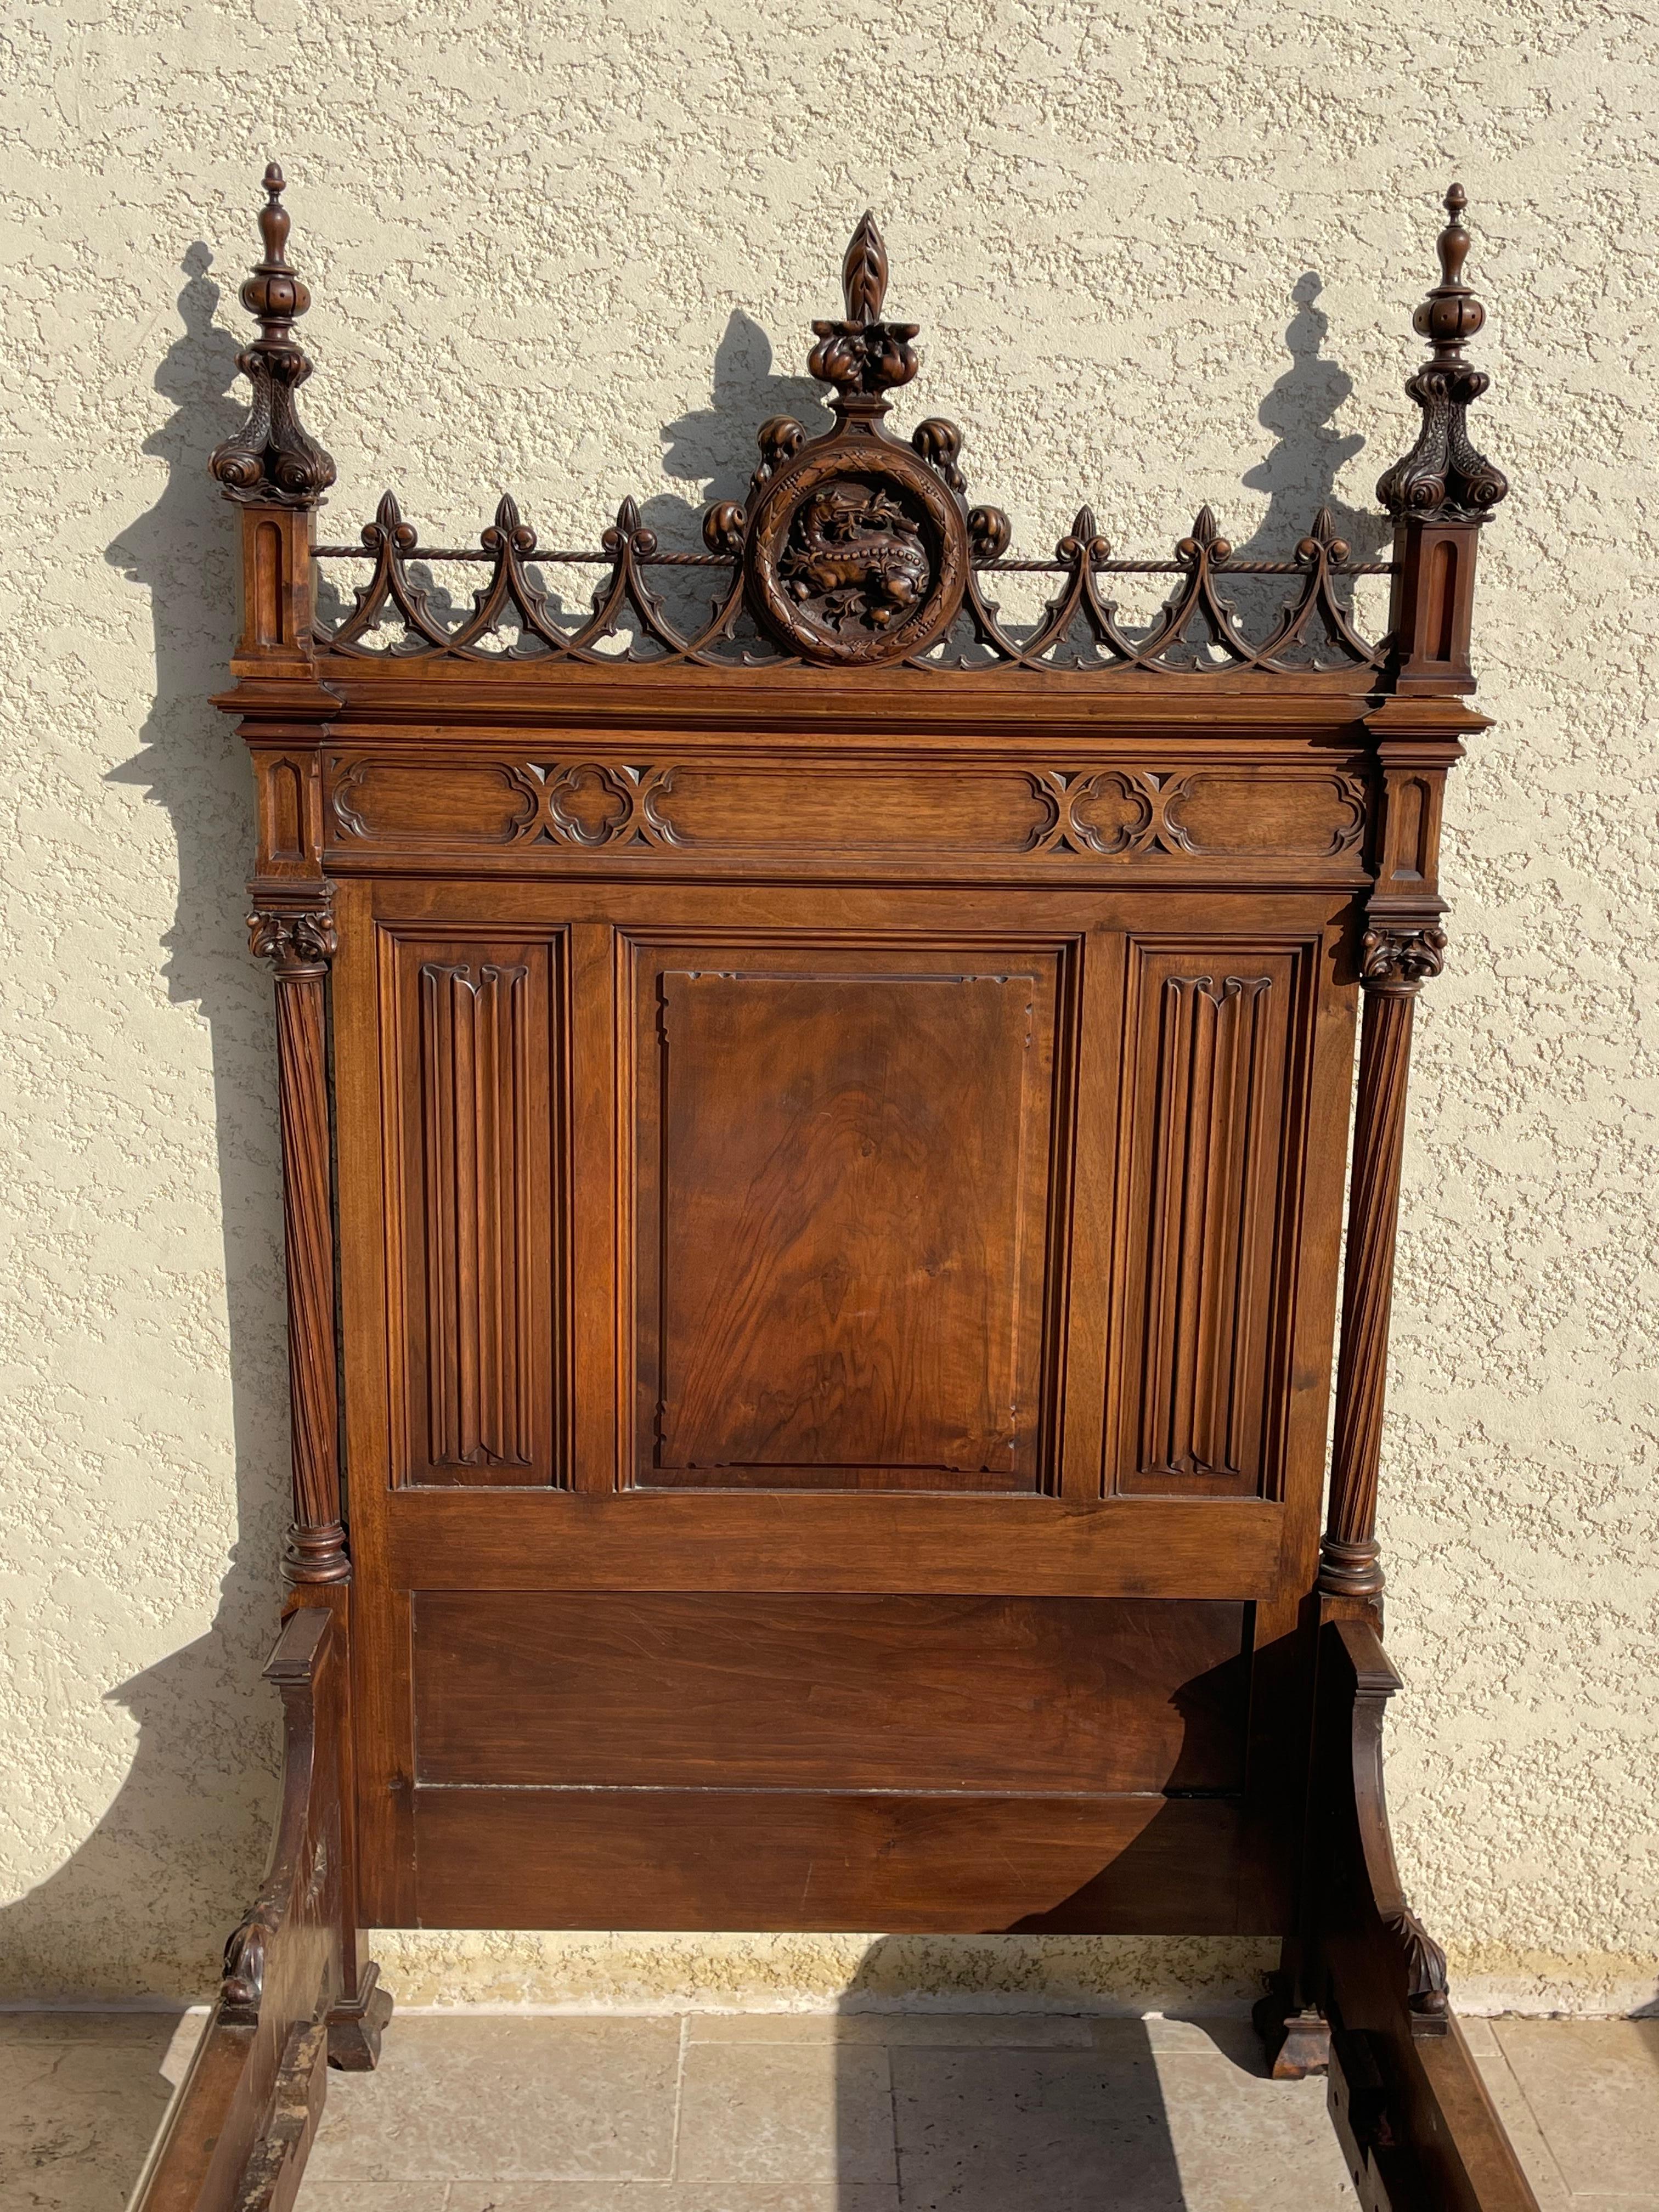 Superb single bed in fully carved walnut in Neo-Gothic style. Pediment decorated with a salamander in the heart of a macaron with points on either side with fish bodies. It is in very good condition. It can also be combined with another neo-Gothic